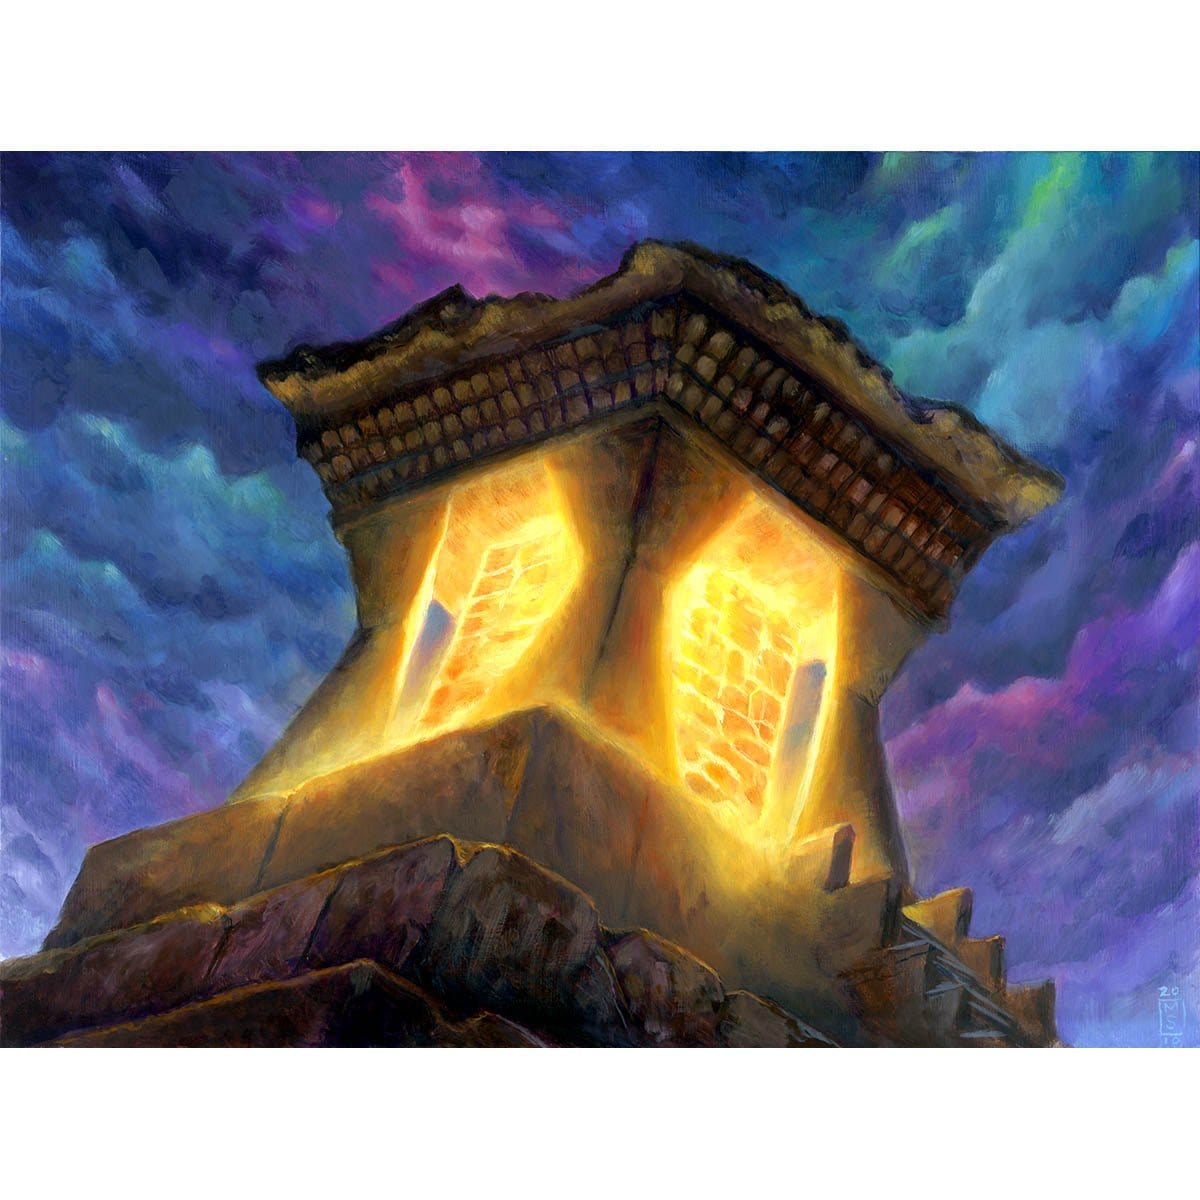 Mana Crypt Print - Print - Original Magic Art - Accessories for Magic the Gathering and other card games